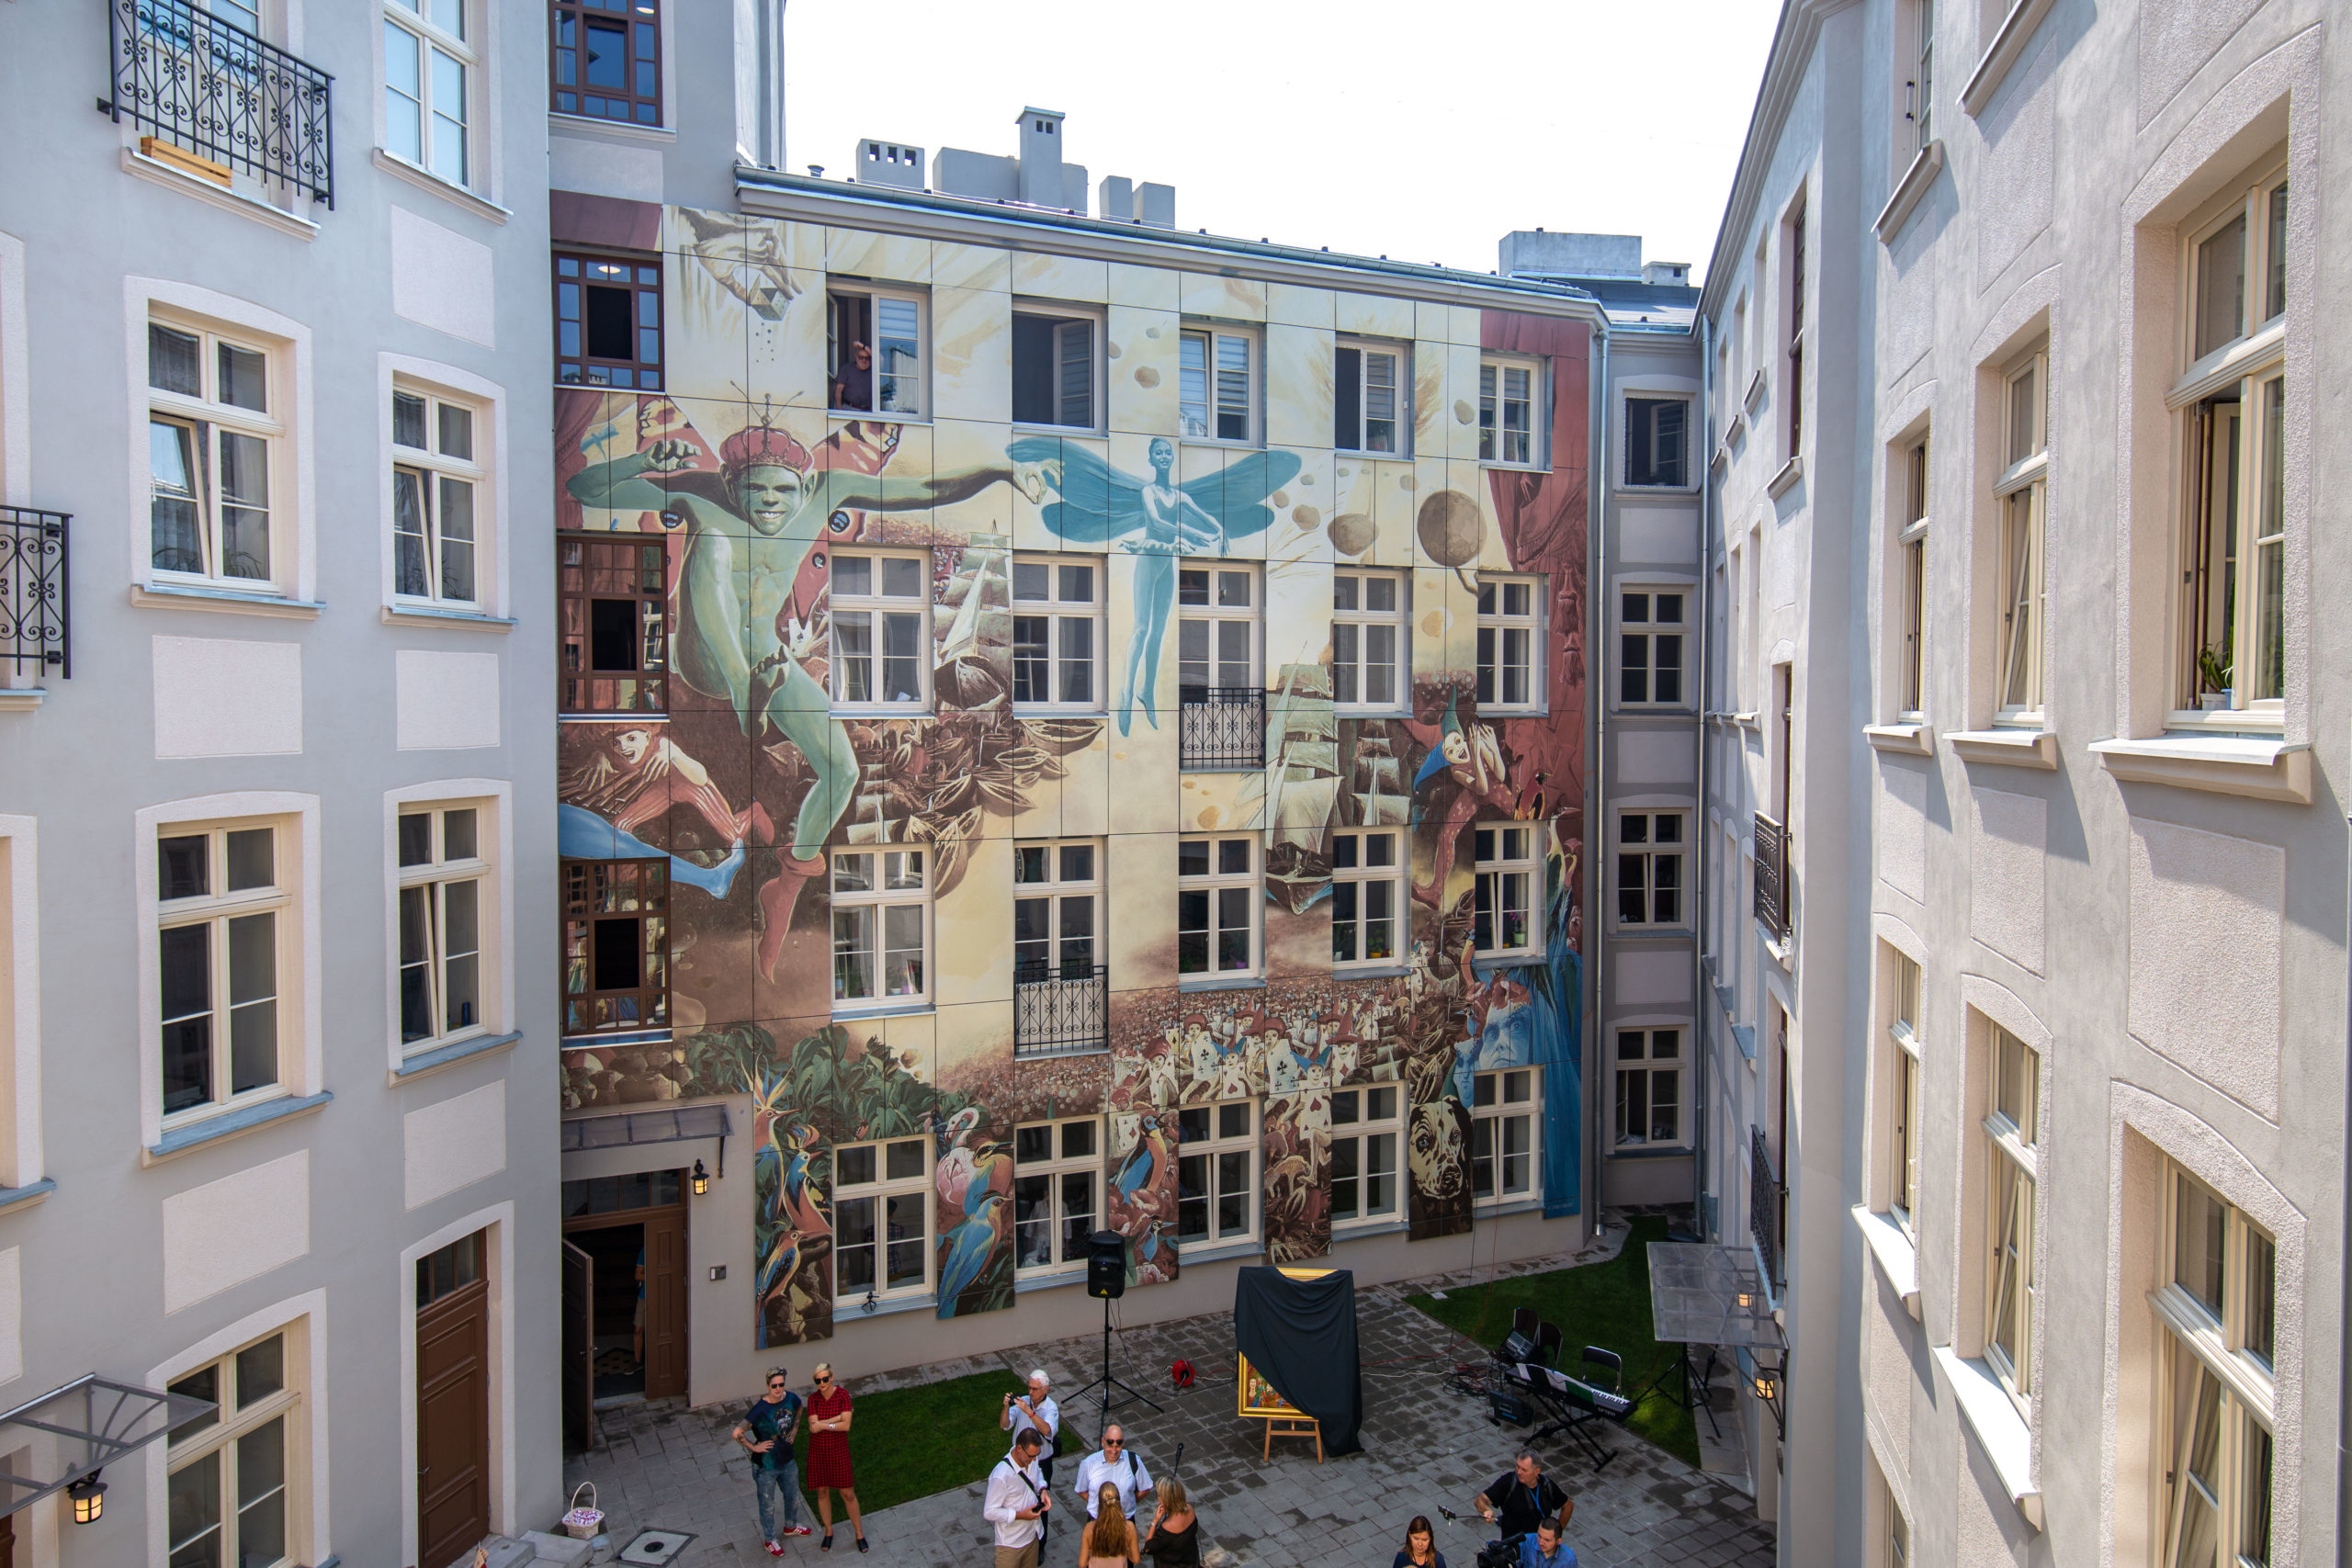 The Birth of the Day – an artistic installation on the facade